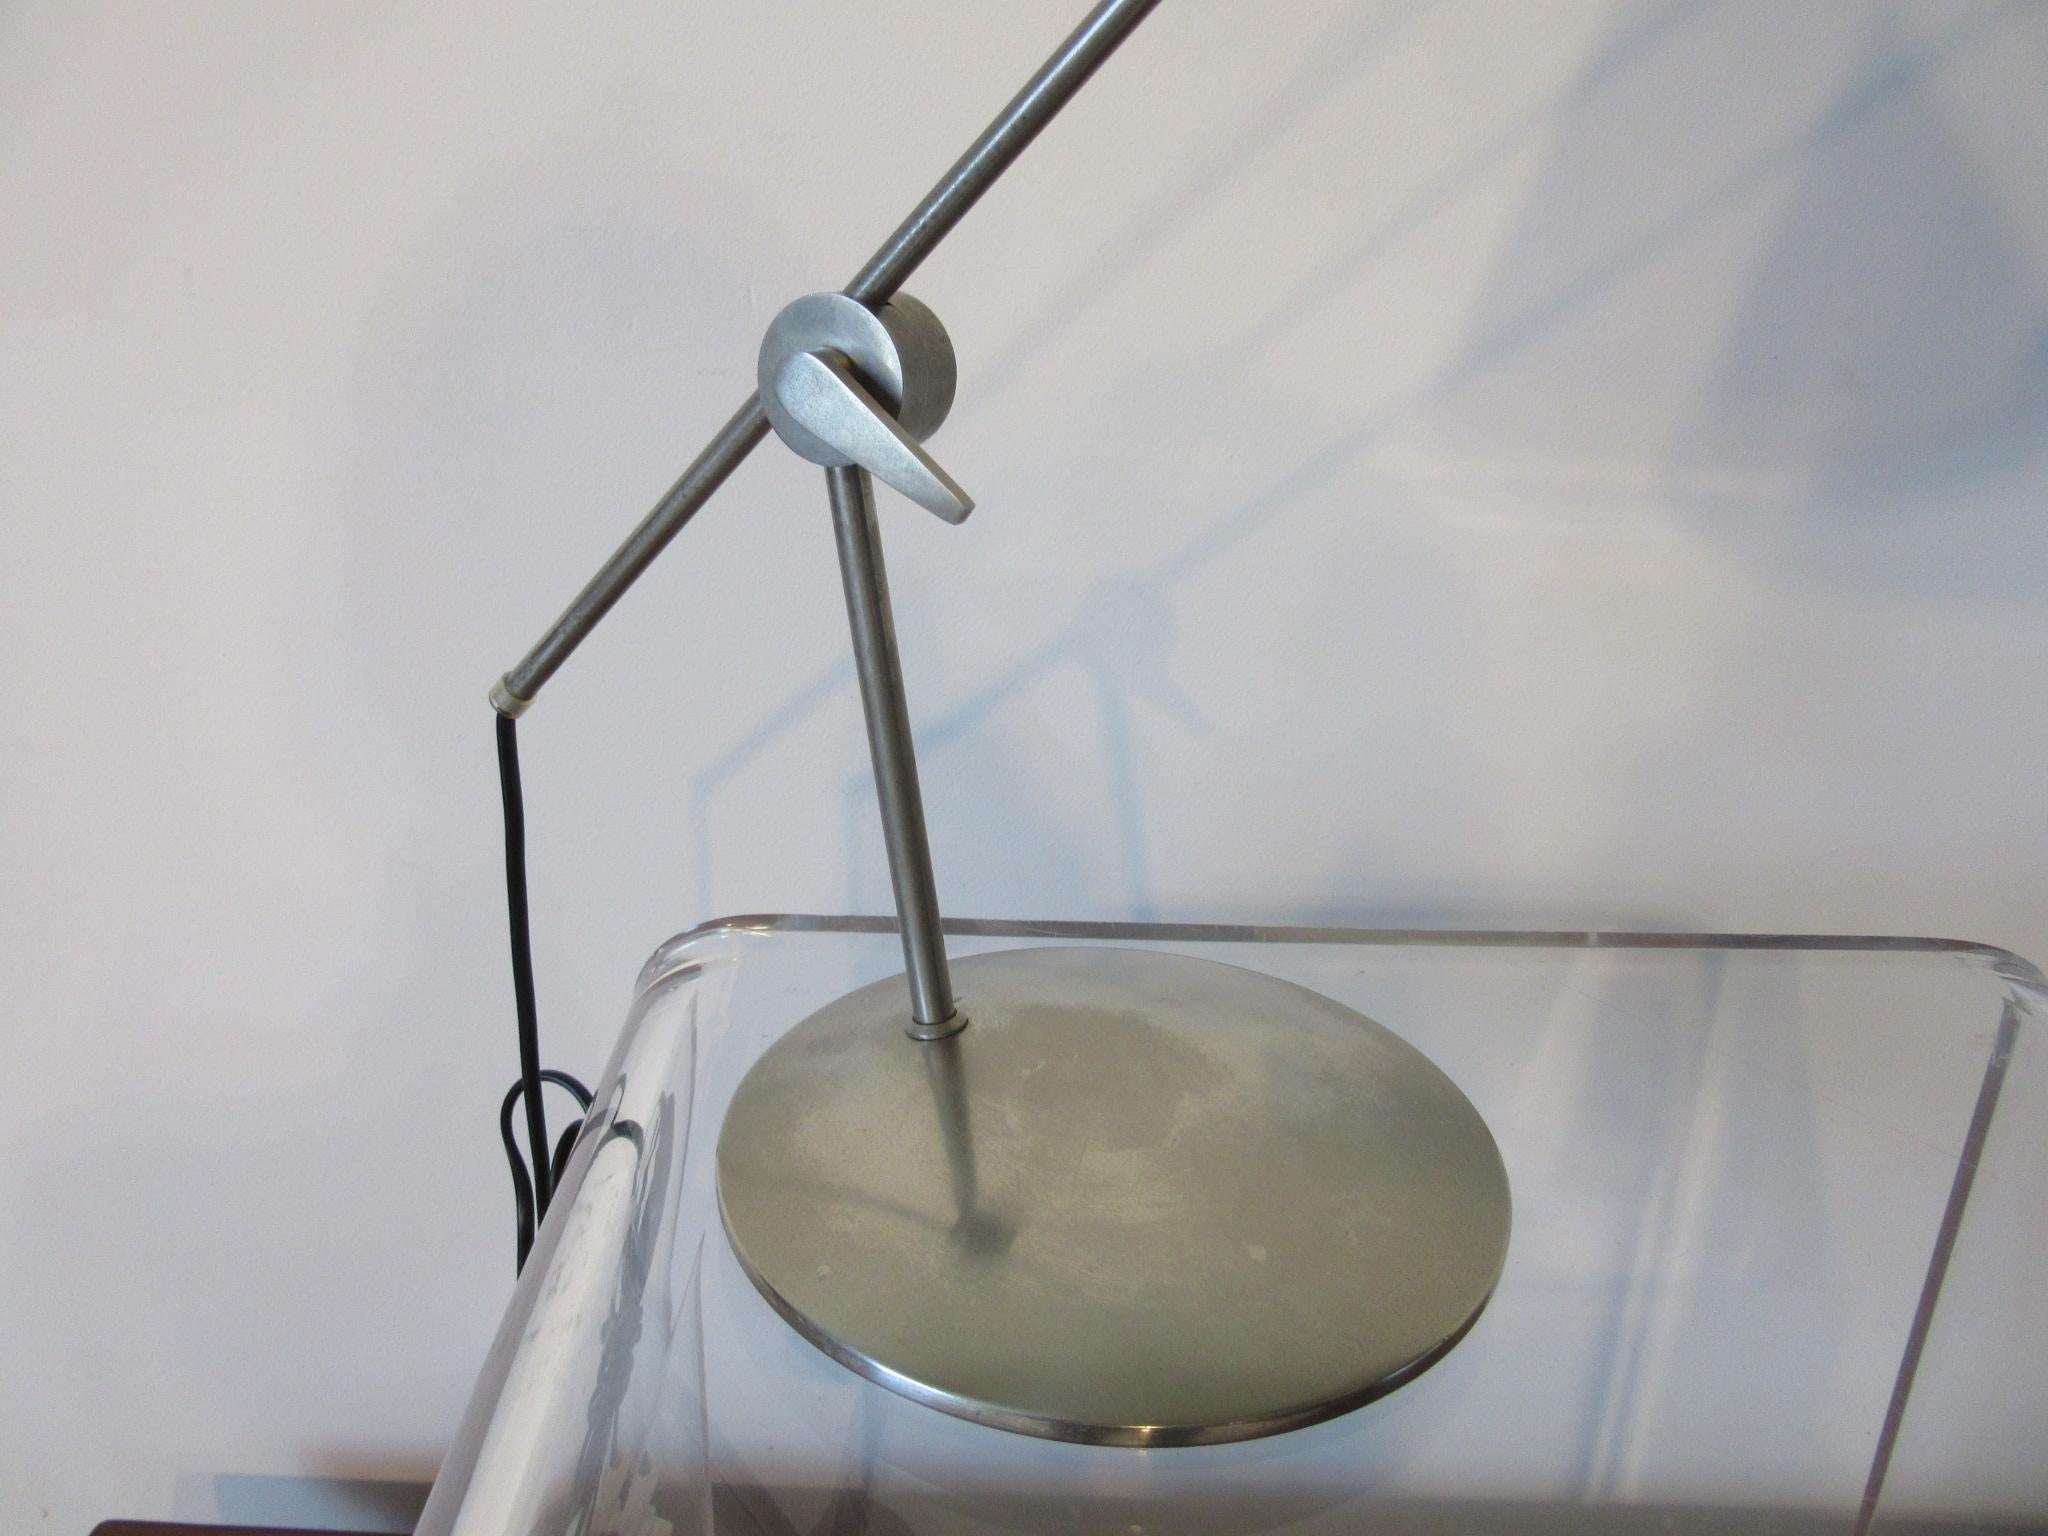 A hard to find steel and nickel plated desk lamp with adjustable arm , push button switch and satin black metal cone shade that swivels , a well crafted lamp made in Denmark and designed by Th . Valentiner  . The dia. of the shade is 9